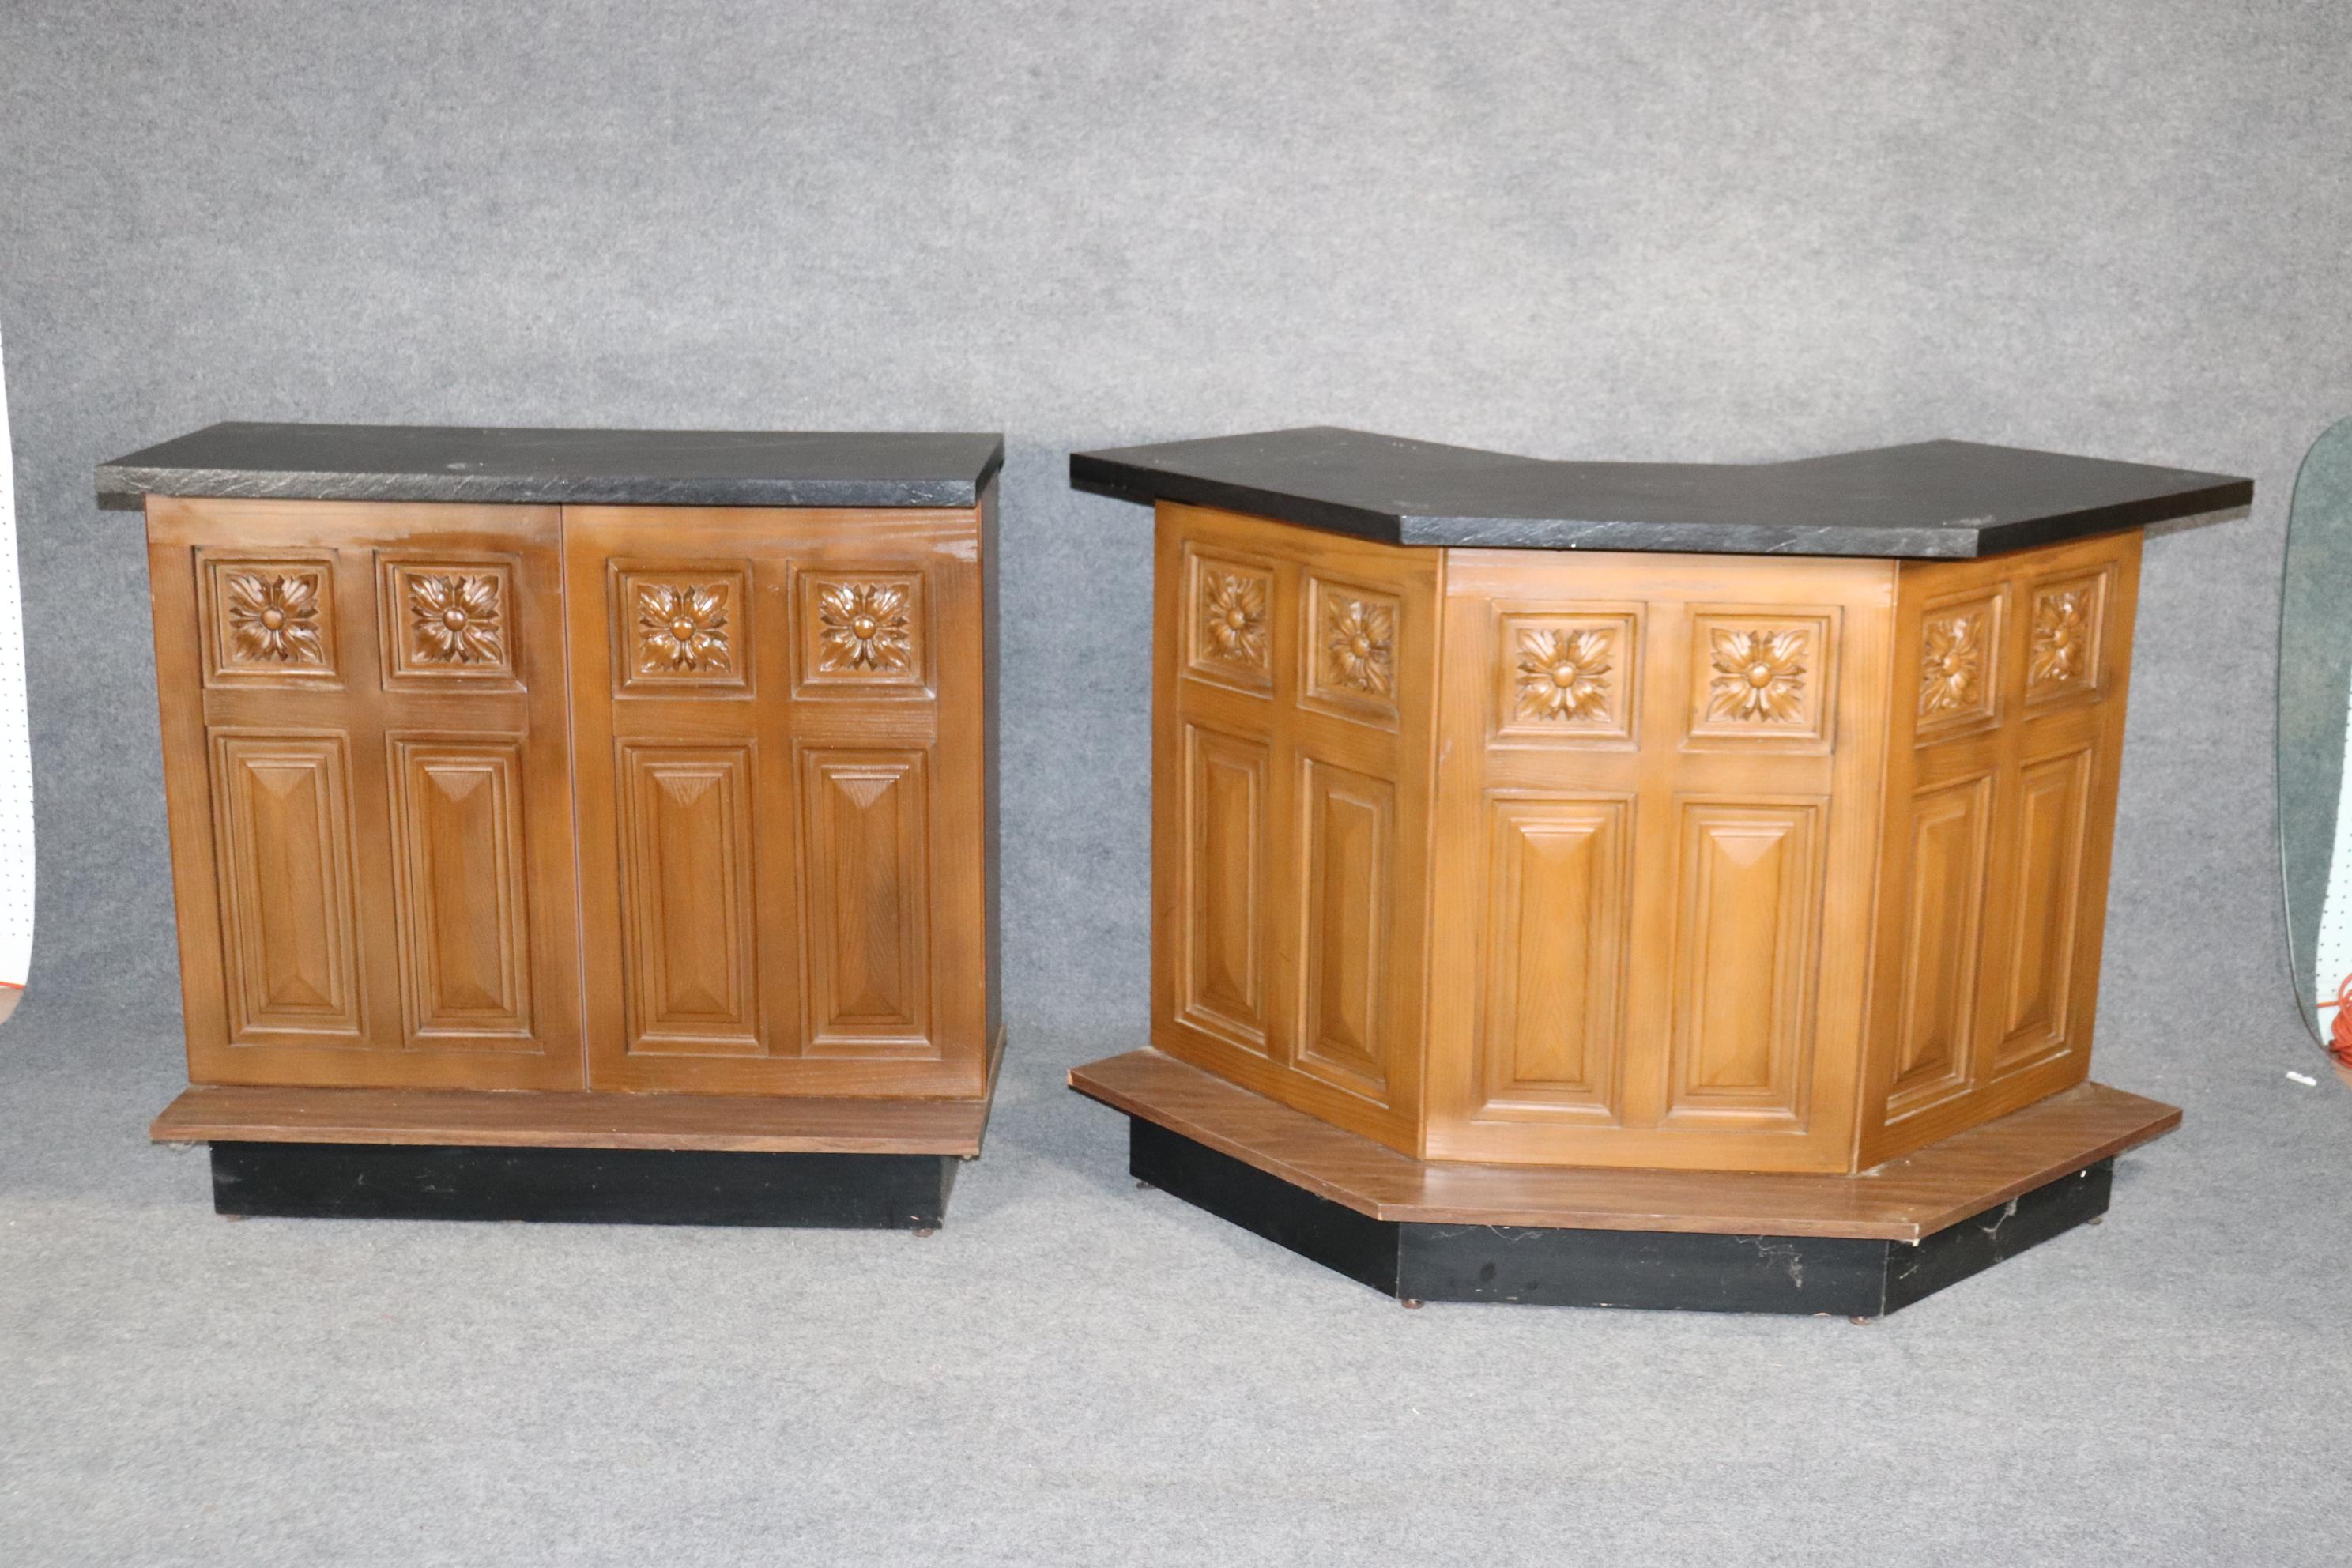 L-shaped bar made of two pieces with black faux slate top. Carved front, storage in back. 
Please confirm location NY or NJ.